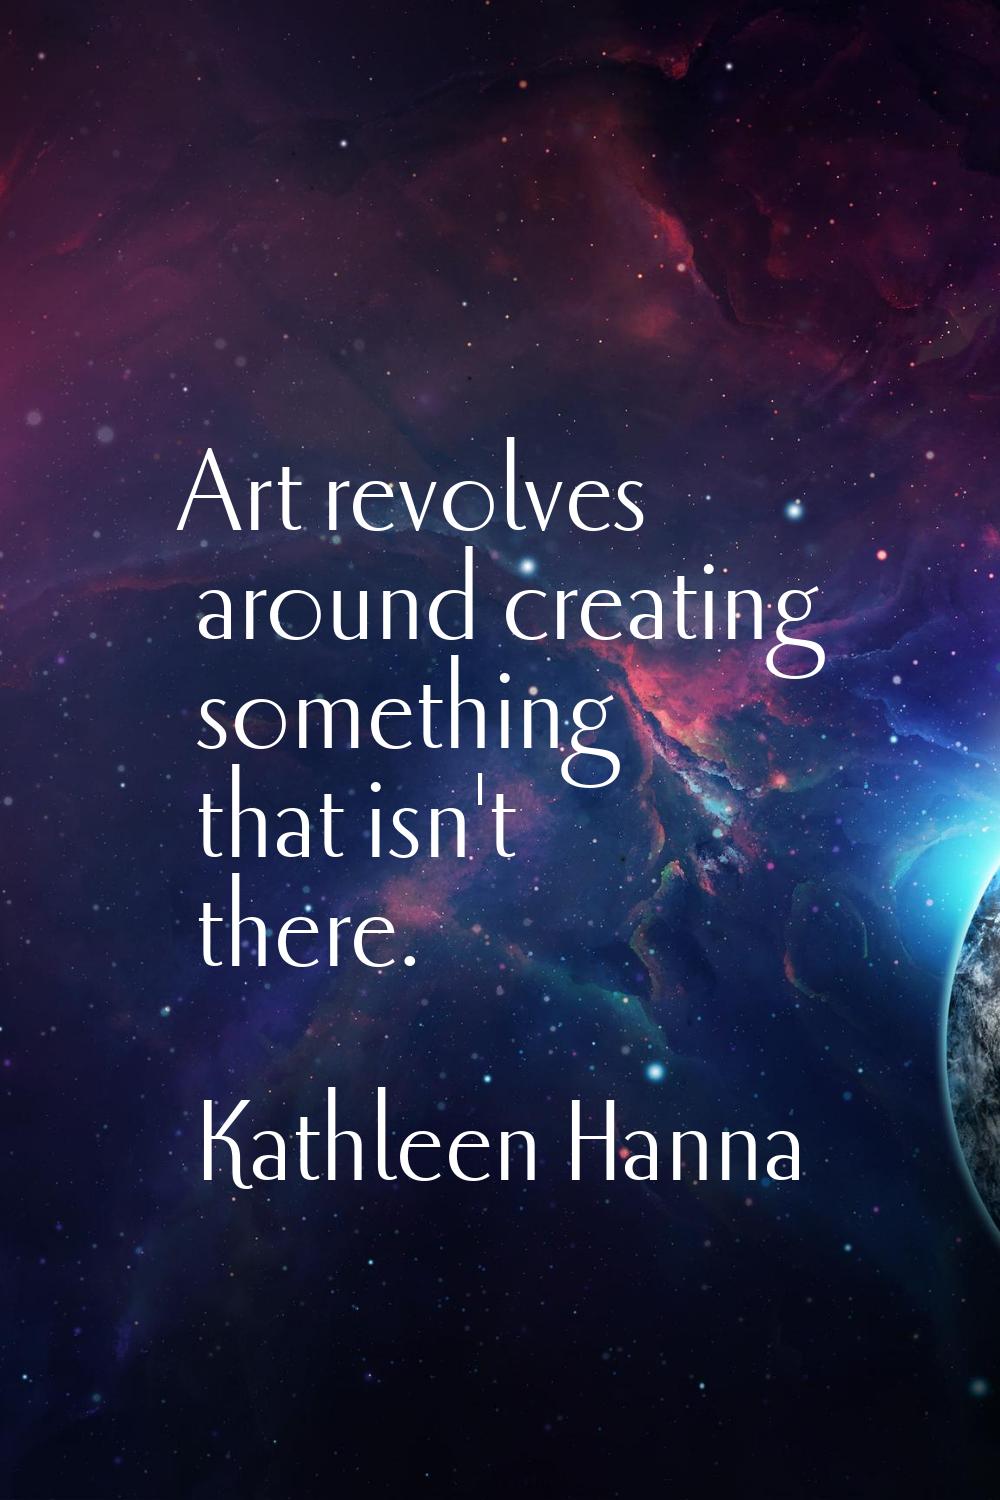 Art revolves around creating something that isn't there.